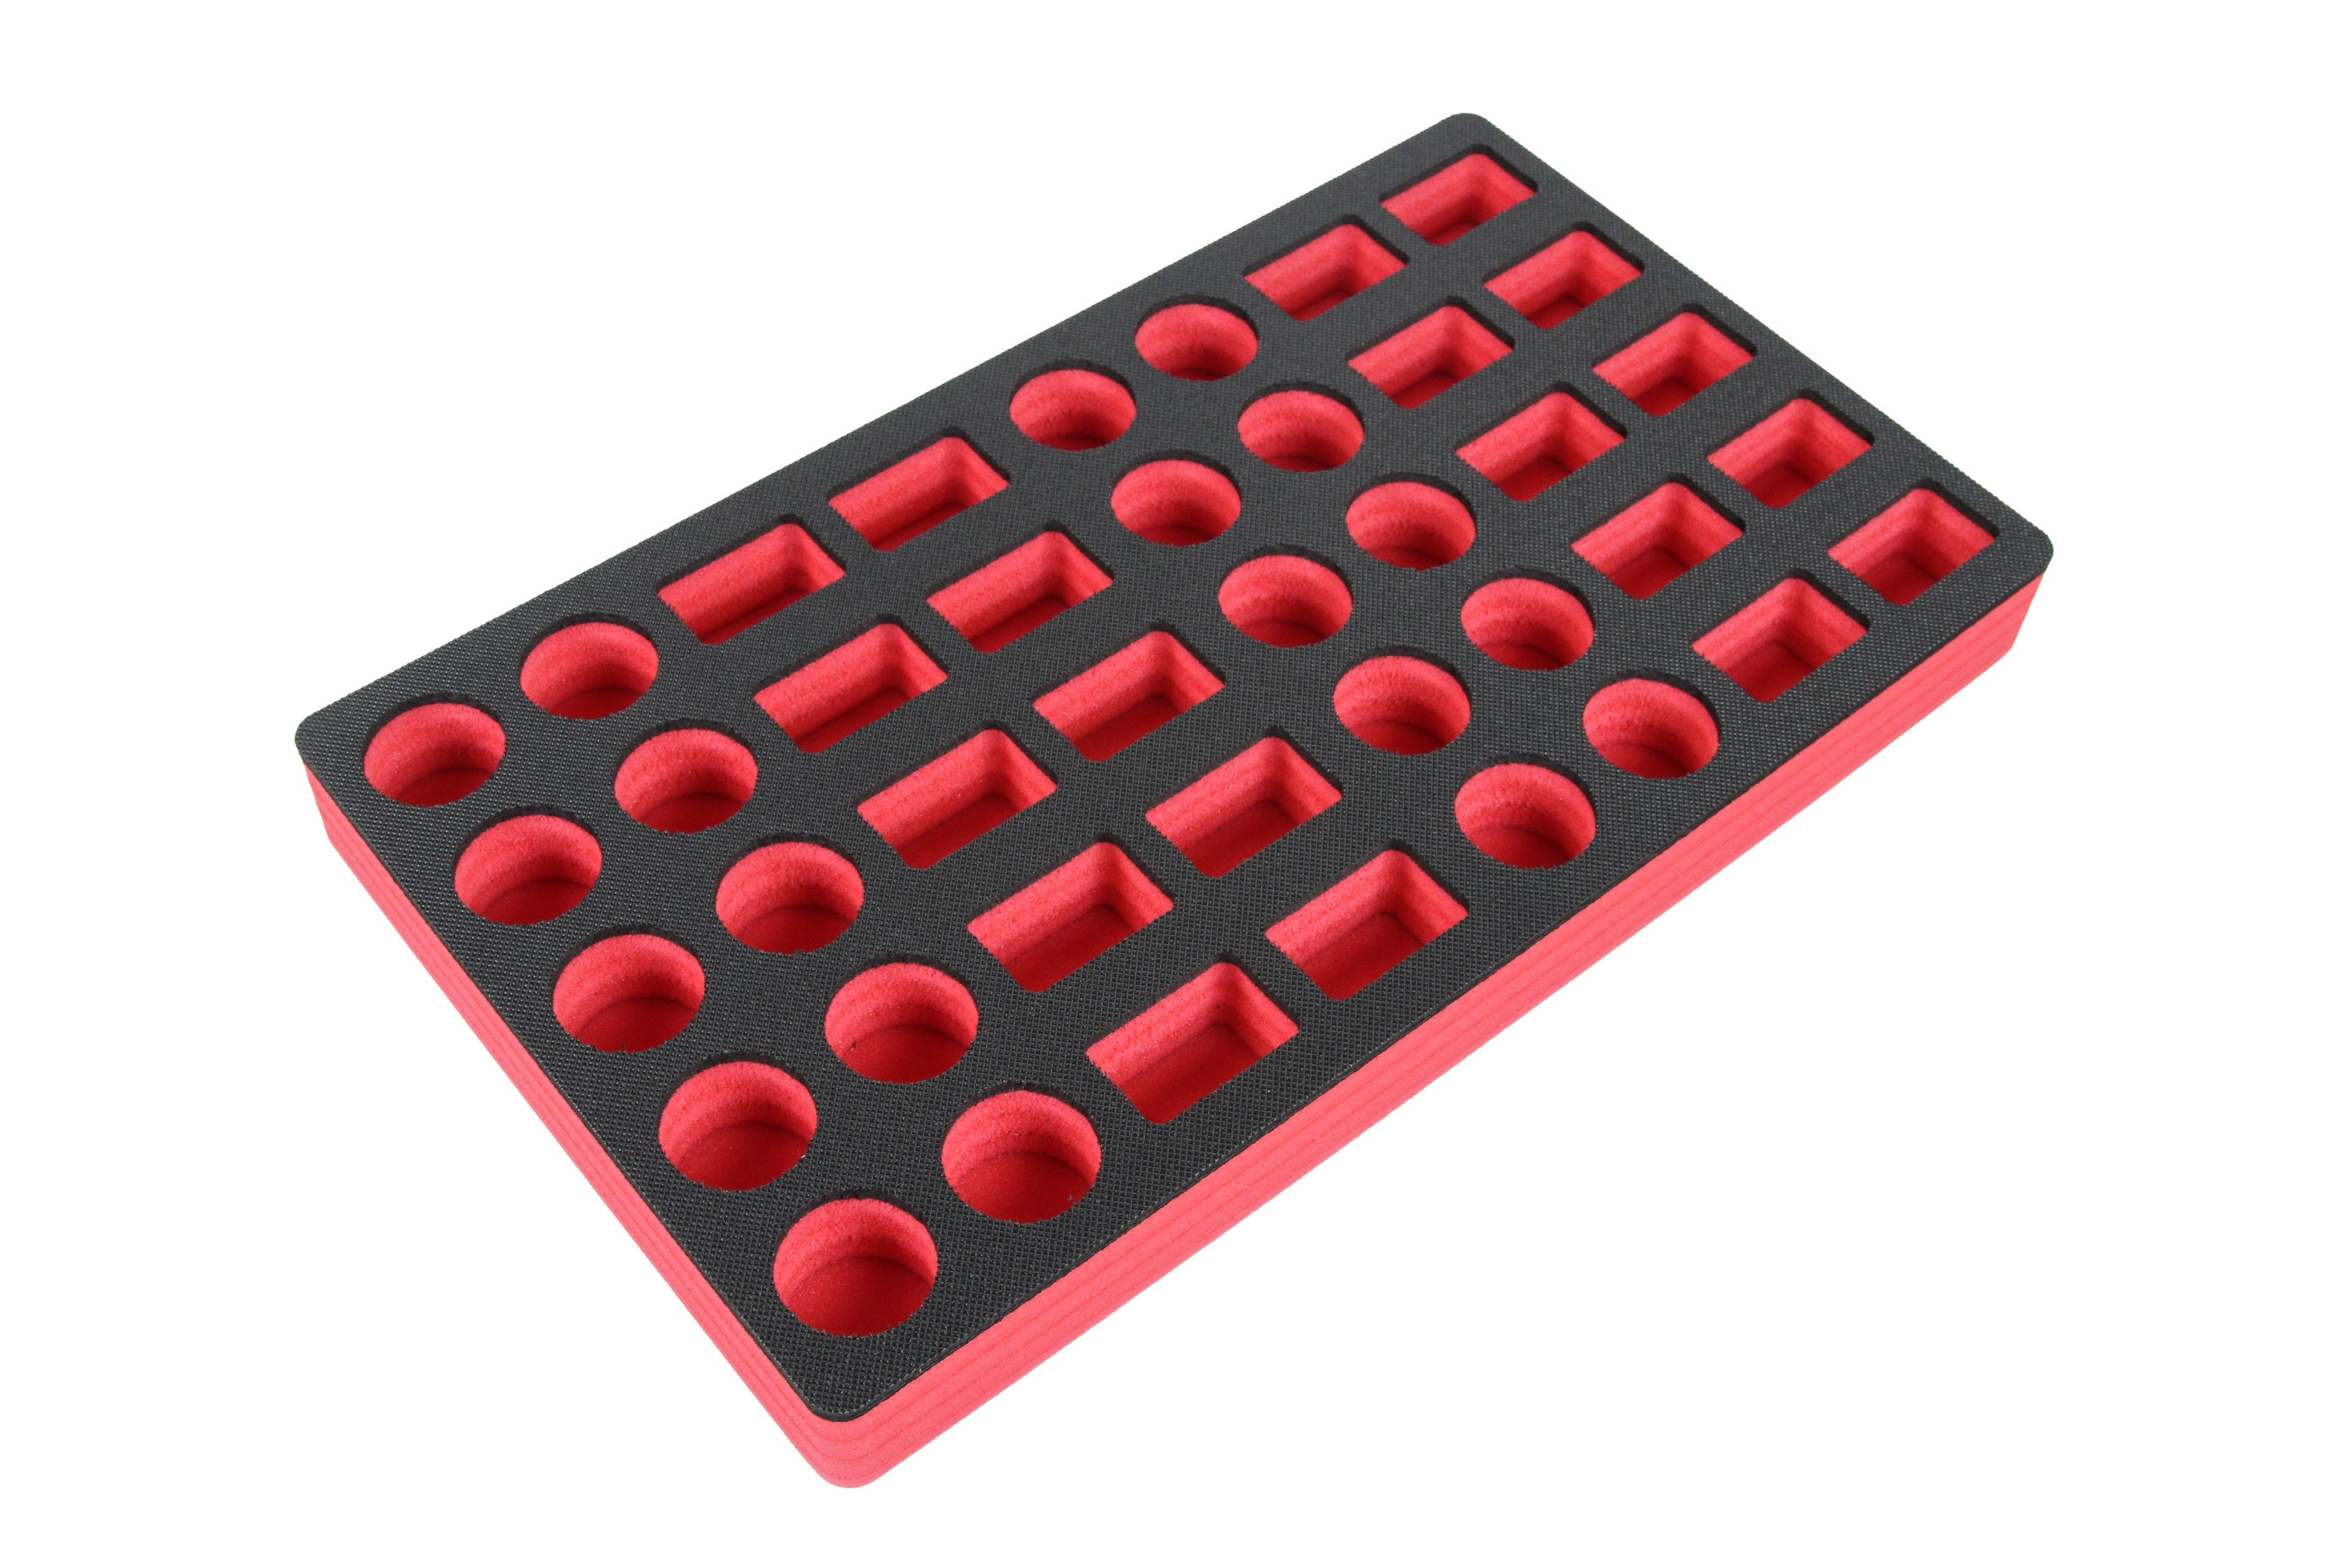 Lotion Body Spray Organizer Large Tray Red Durable Foam Washable Waterproof Insert for Home Bathroom Bedroom Office 23.25 x 13.5 x 2 Inches 40 Slots